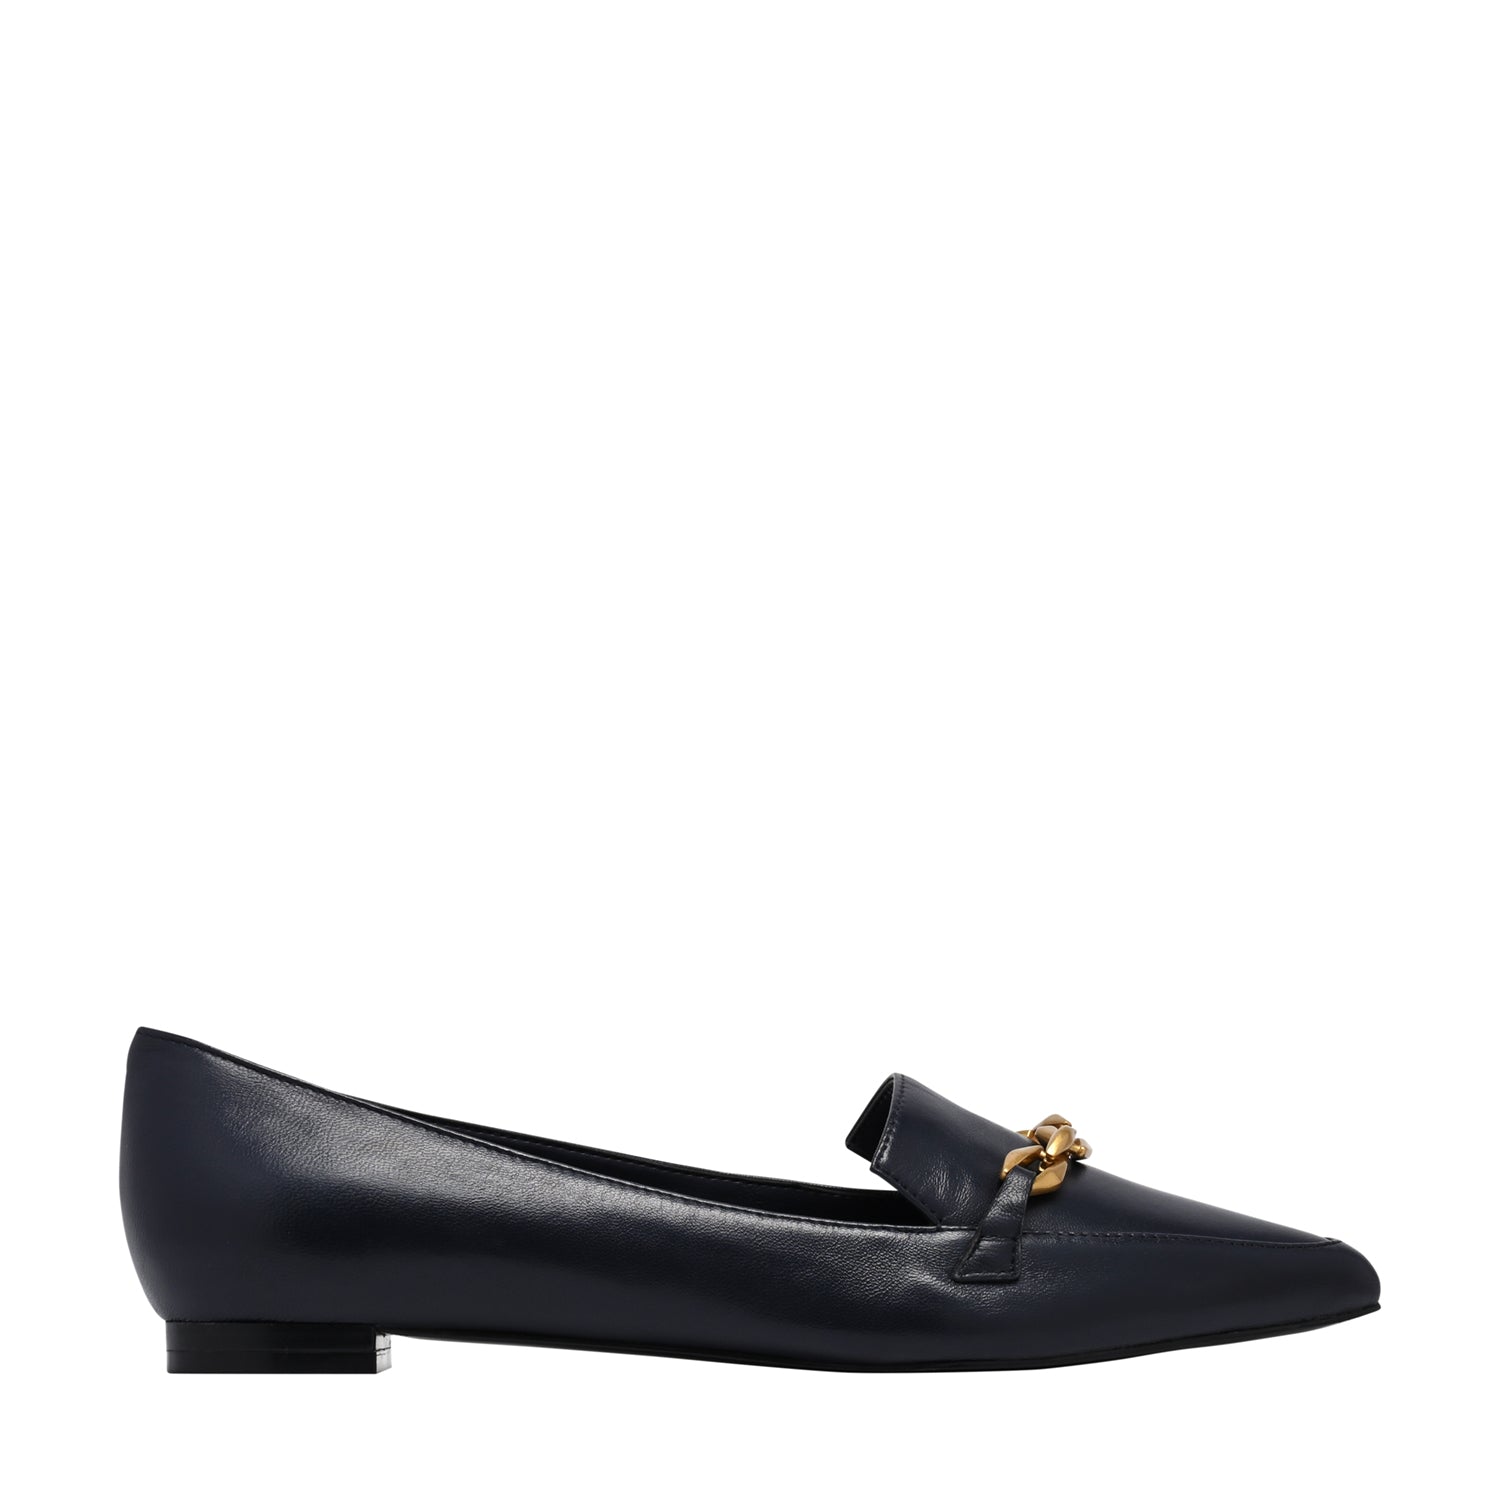 AHARA LOAFERS